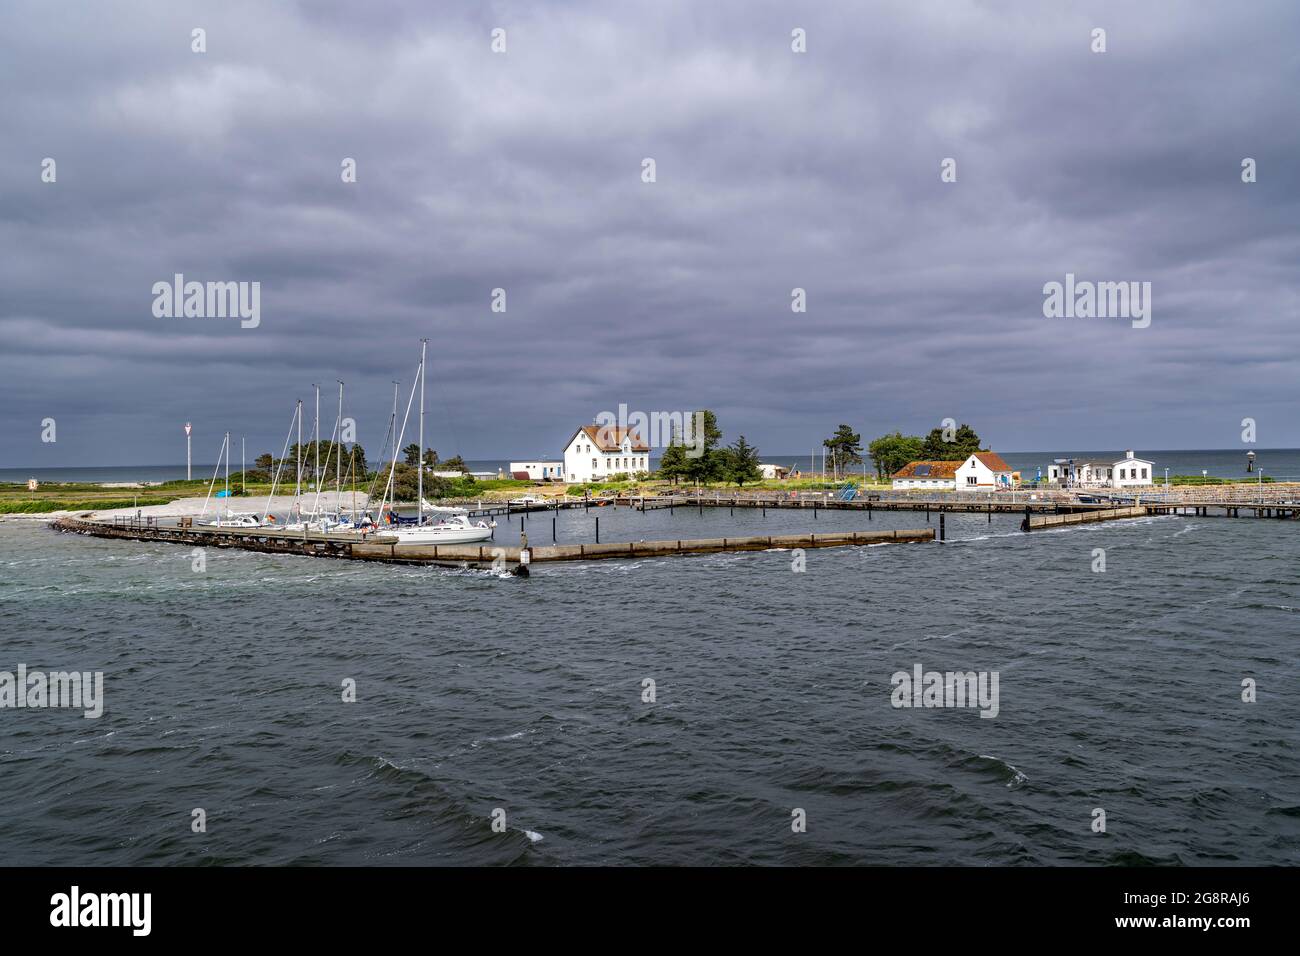 The ‘Lotseninsel’ (pilot island) Schleimünde at the mouth of the Schlei inlet in Schleswig-Holstein, Germany Stock Photo